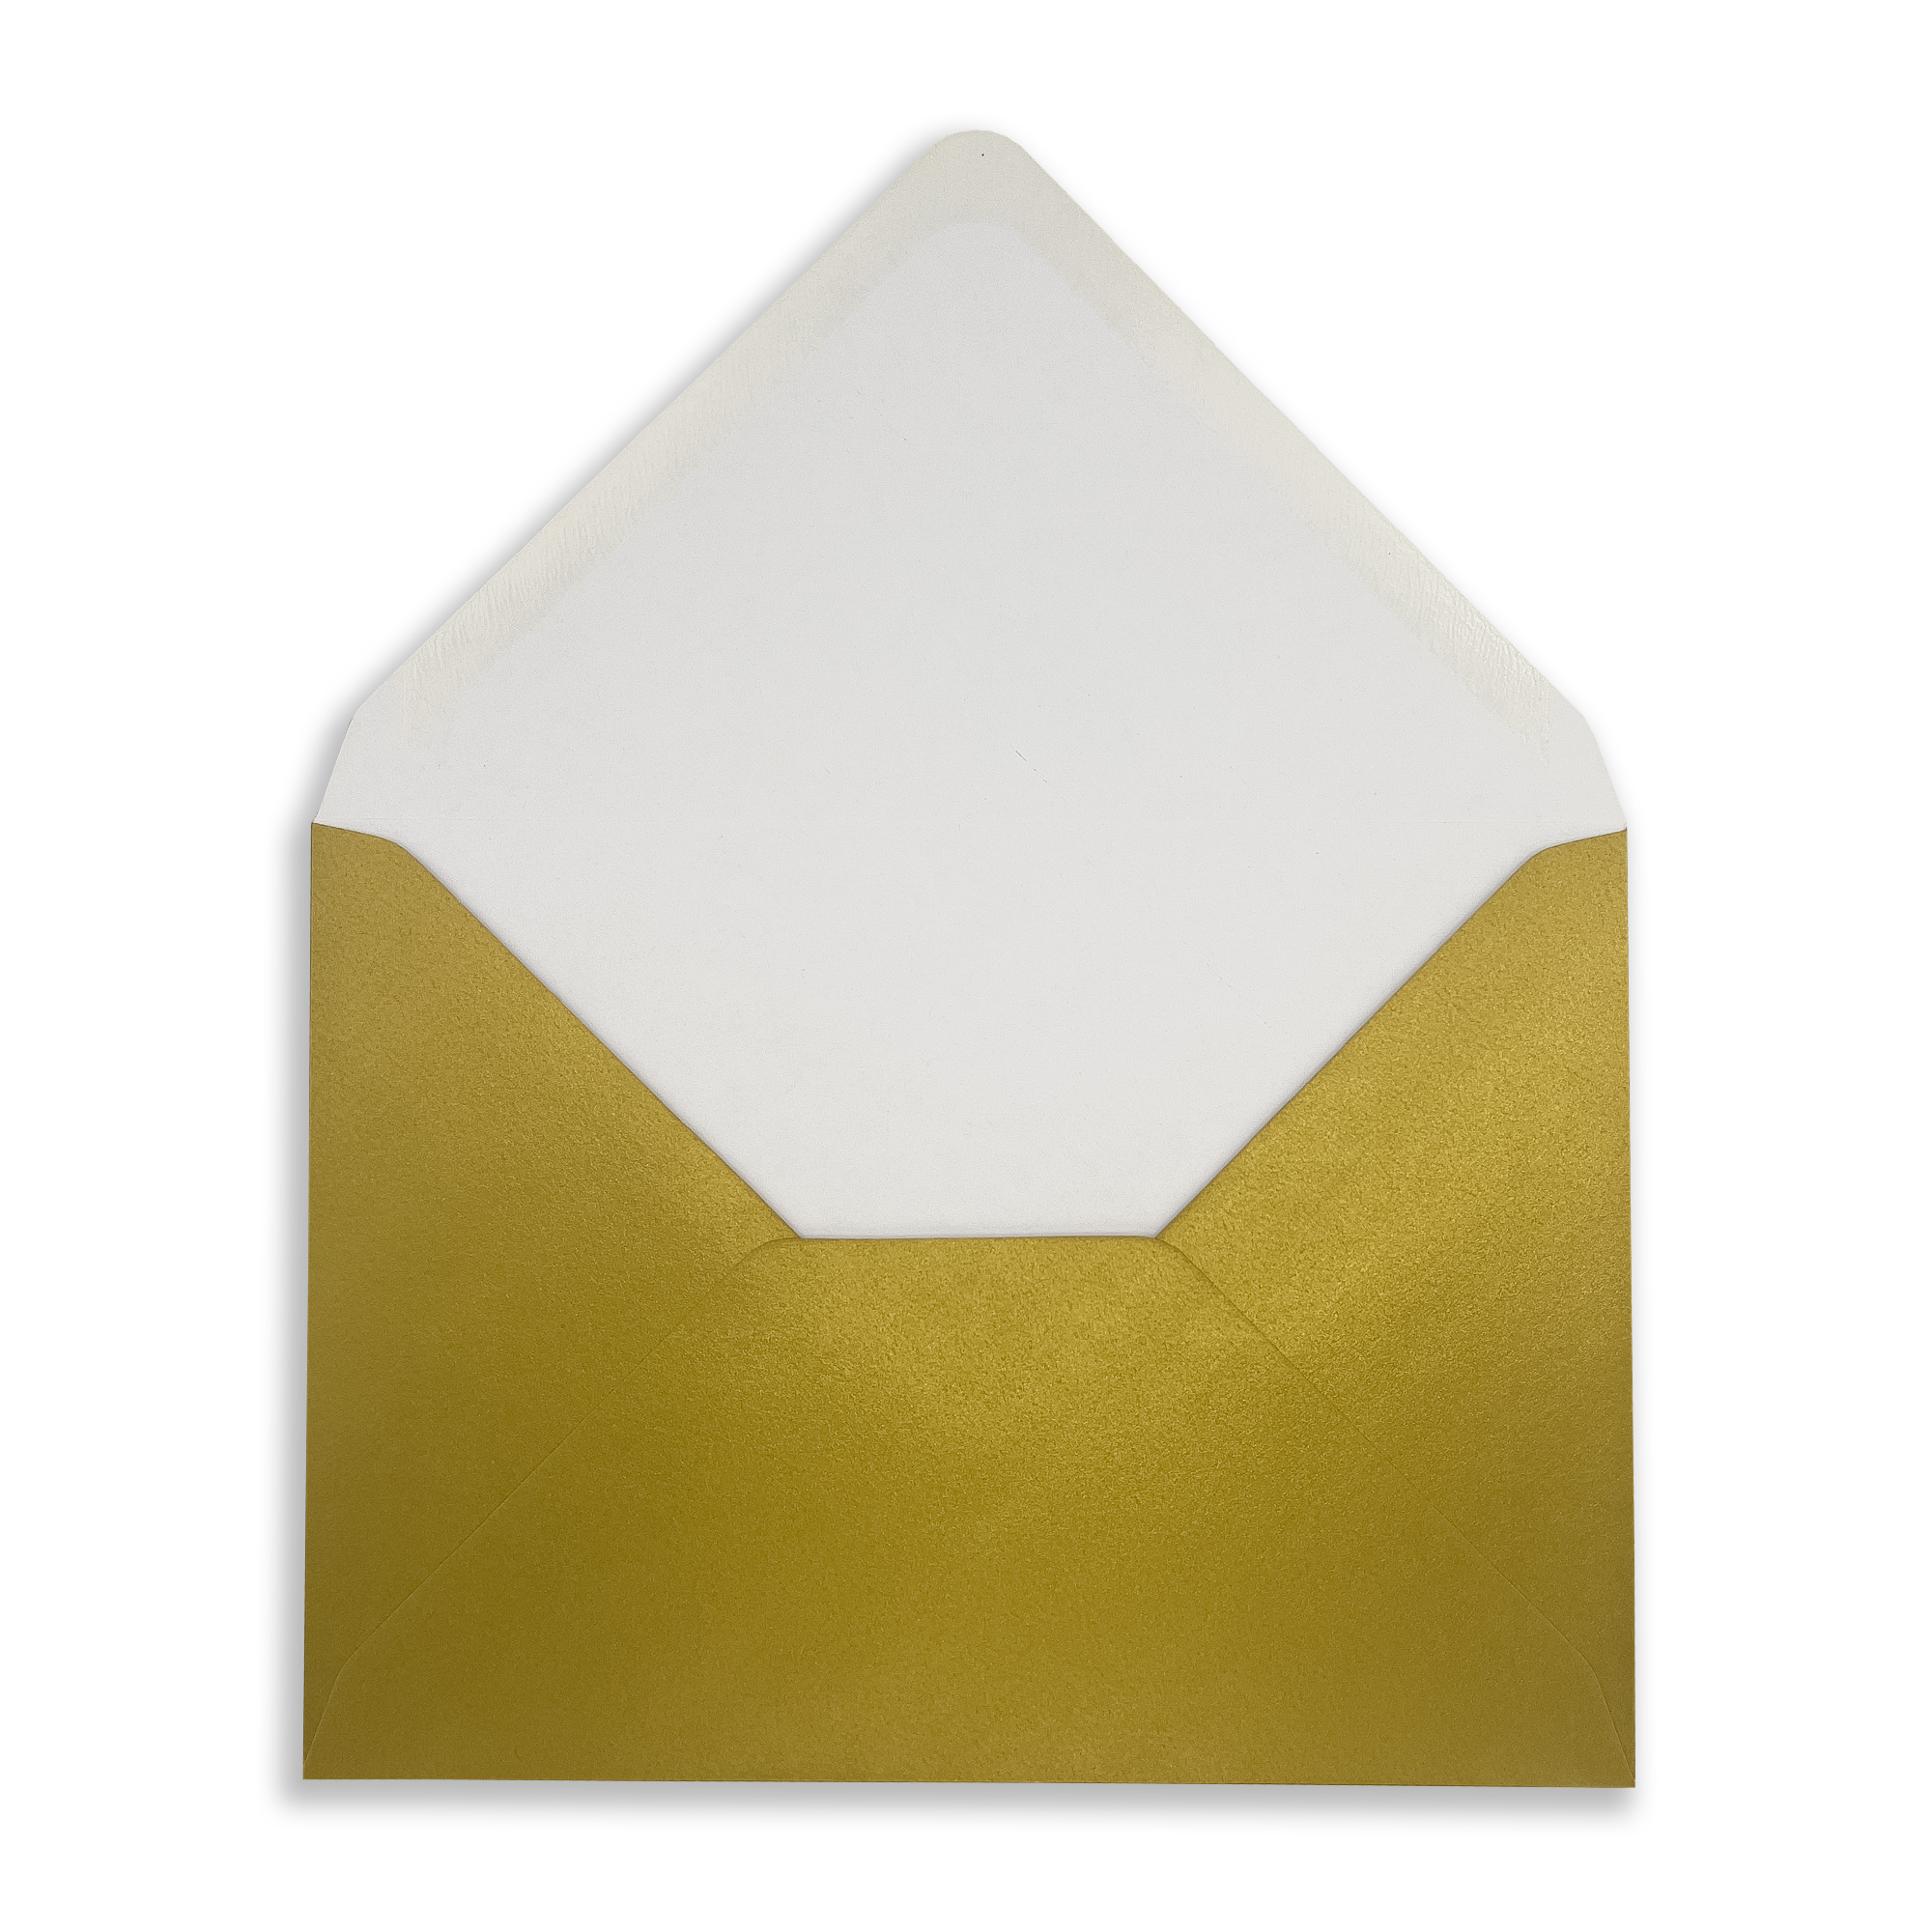 Empire_Gold_133184_Envelope_OpenFlap